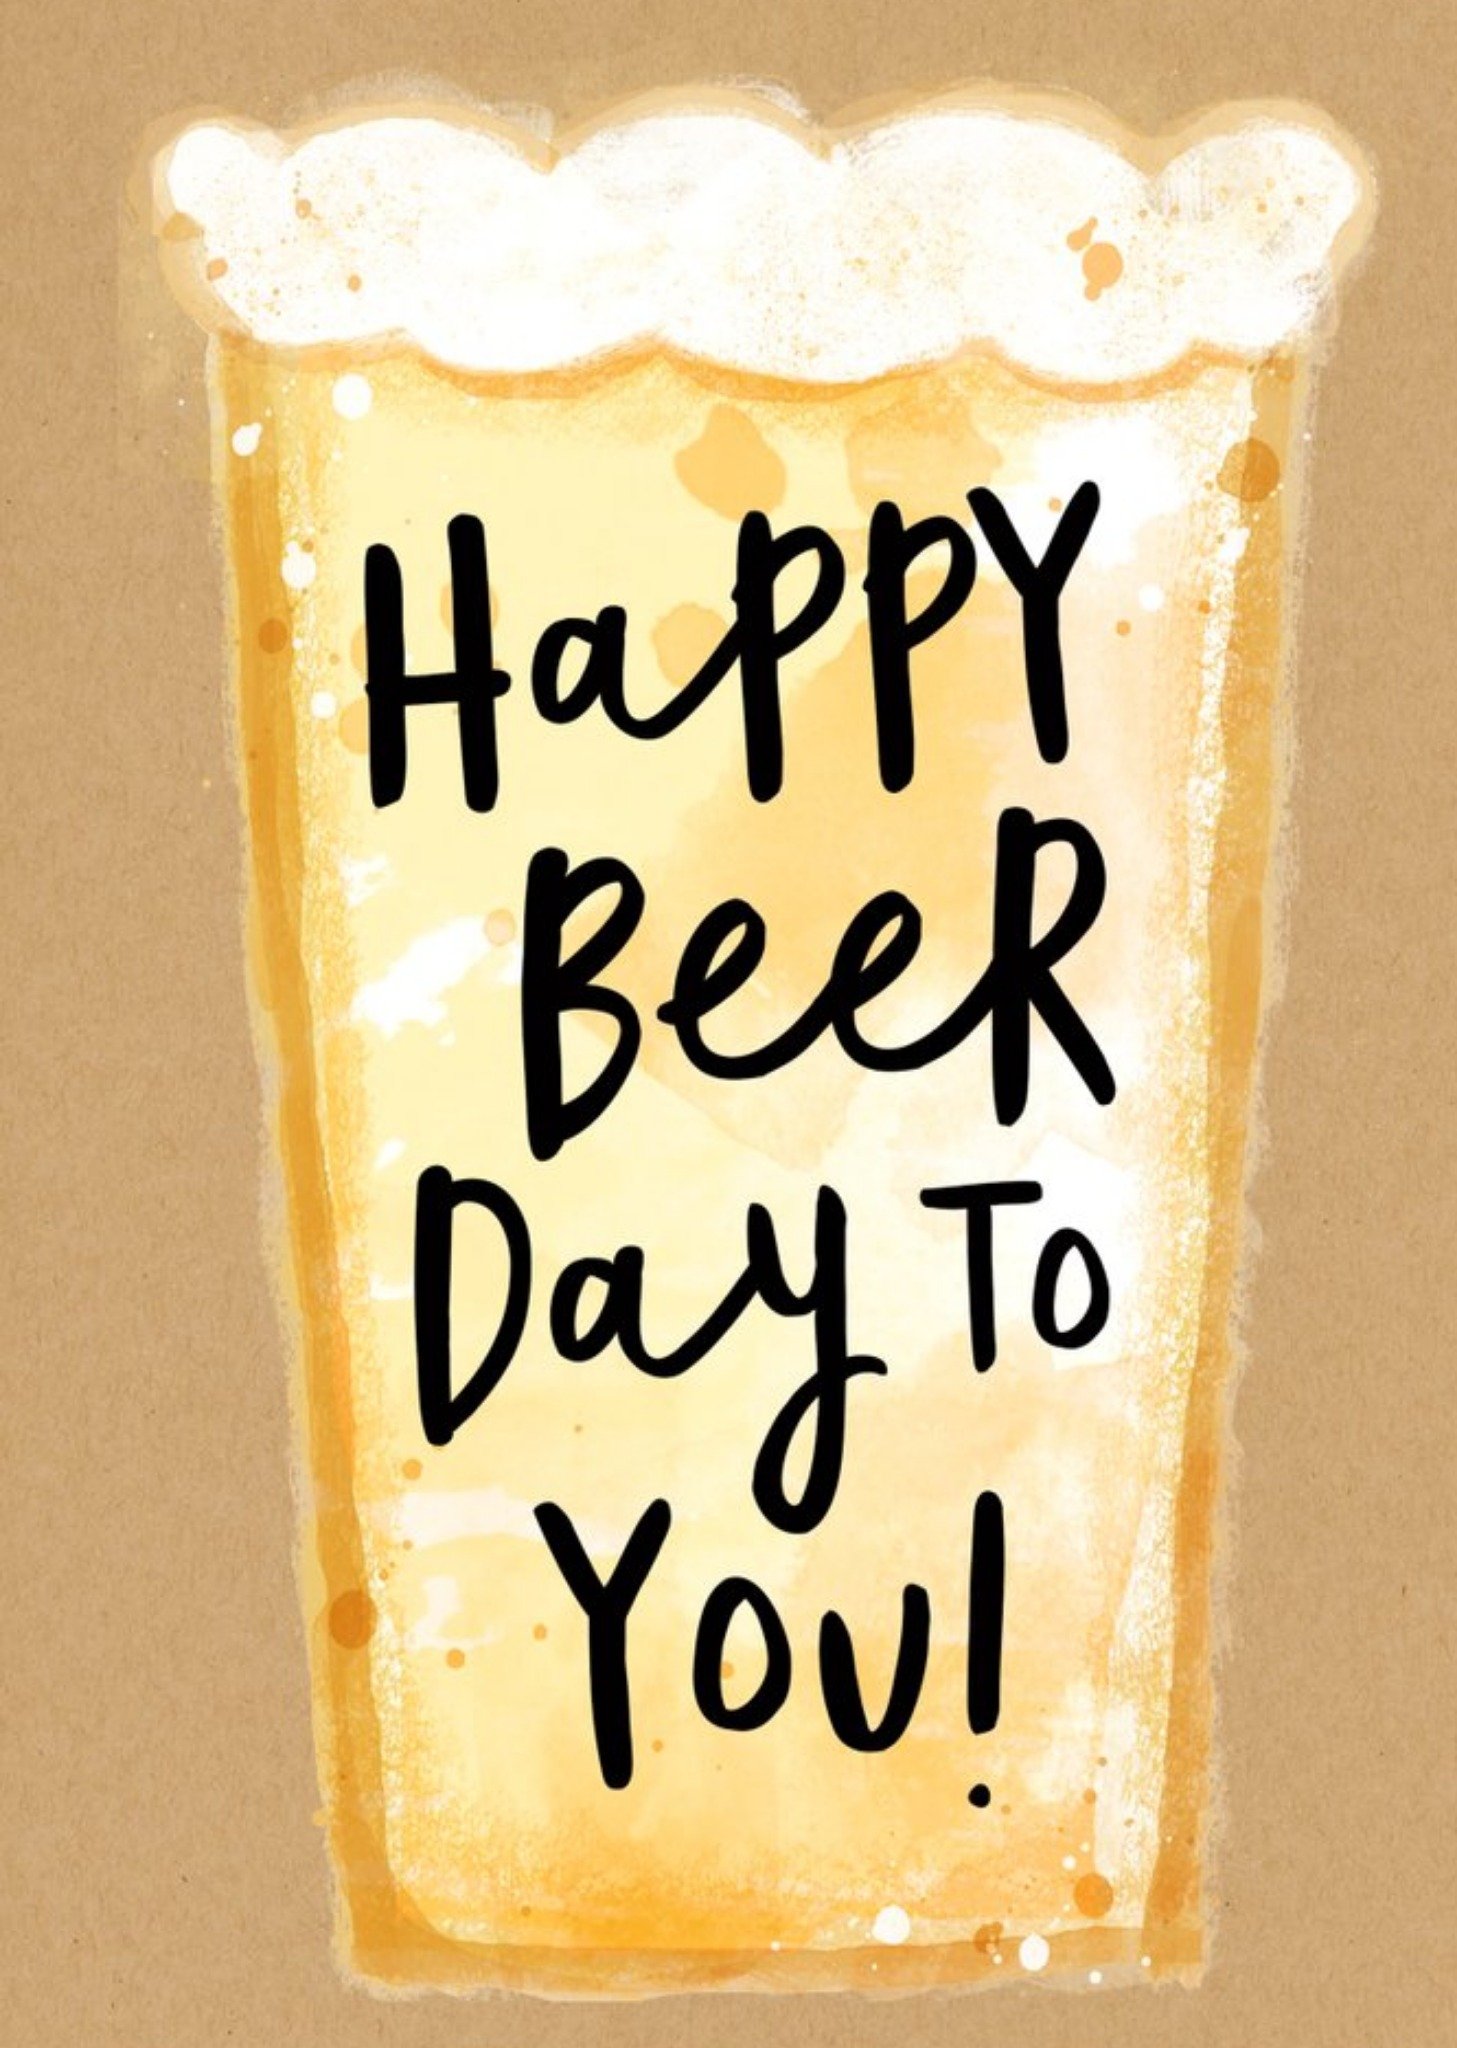 Moonpig Illustrated Beer Glass Pun Birthday Card, Large